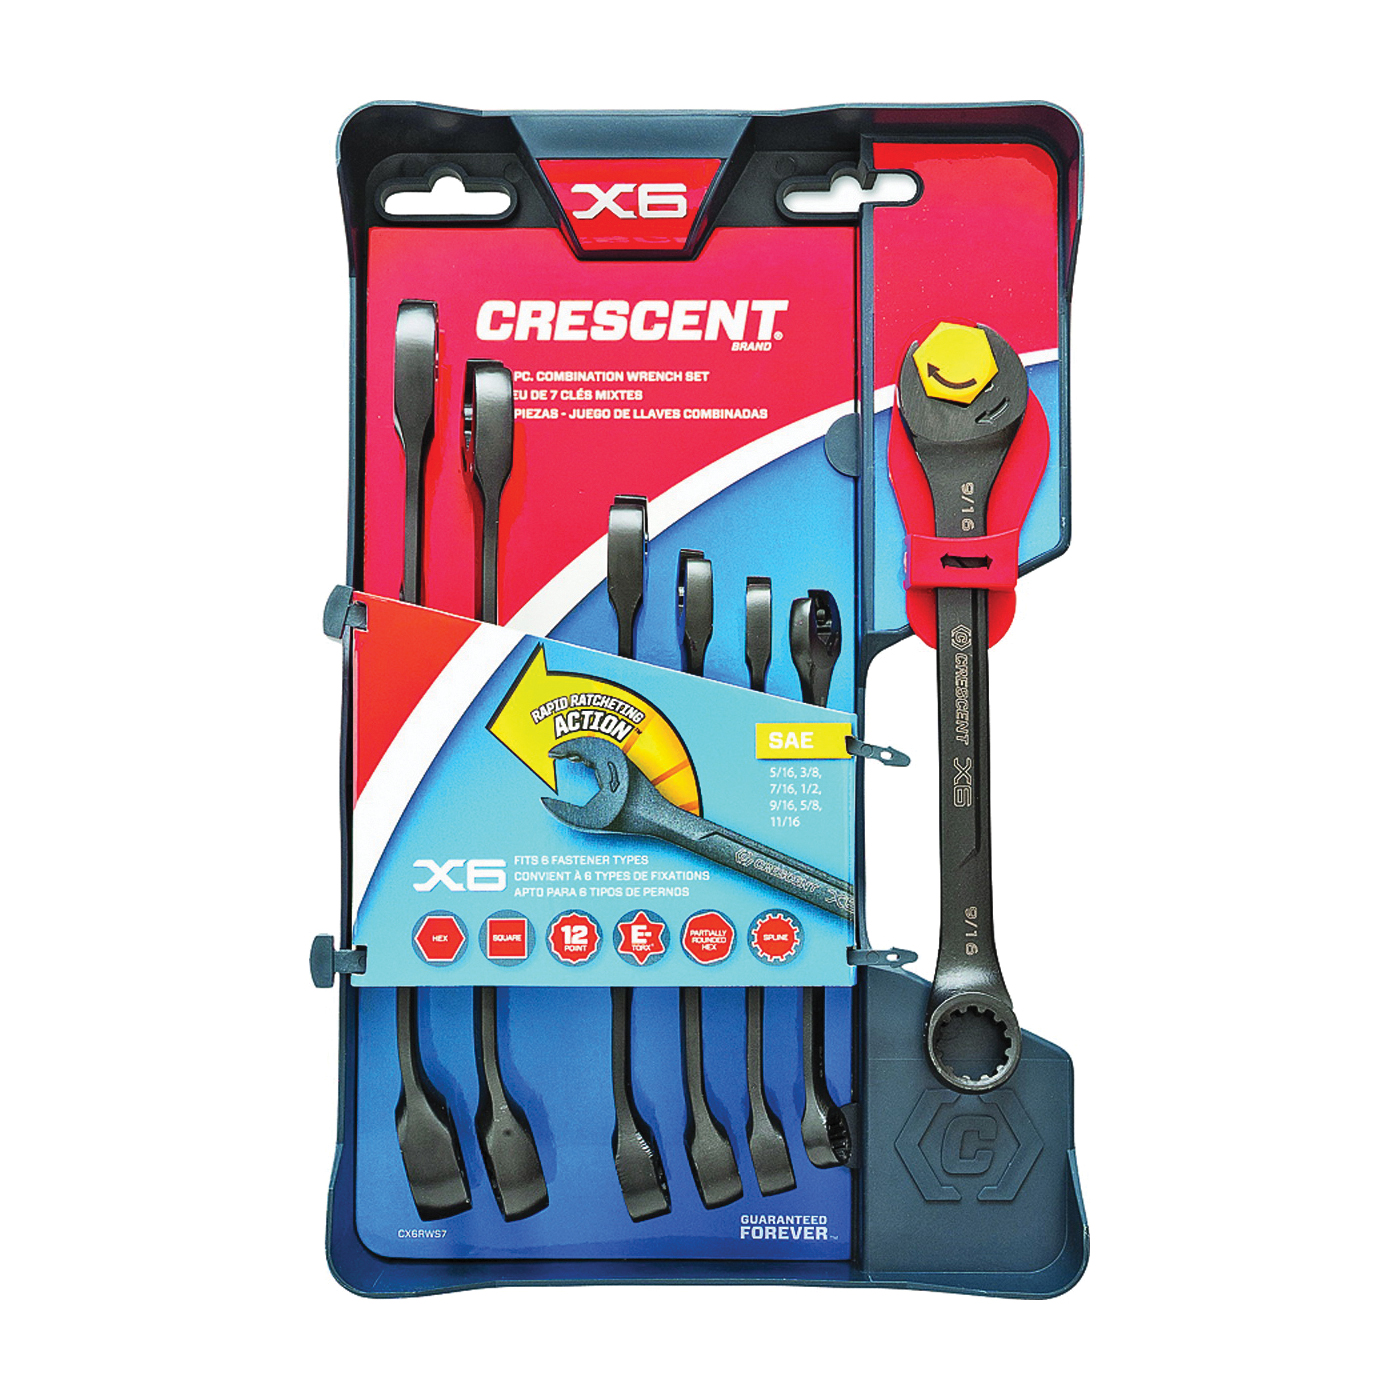 CX6RWS7 Wrench Set, 7-Piece, Specifications: SAE Measurement